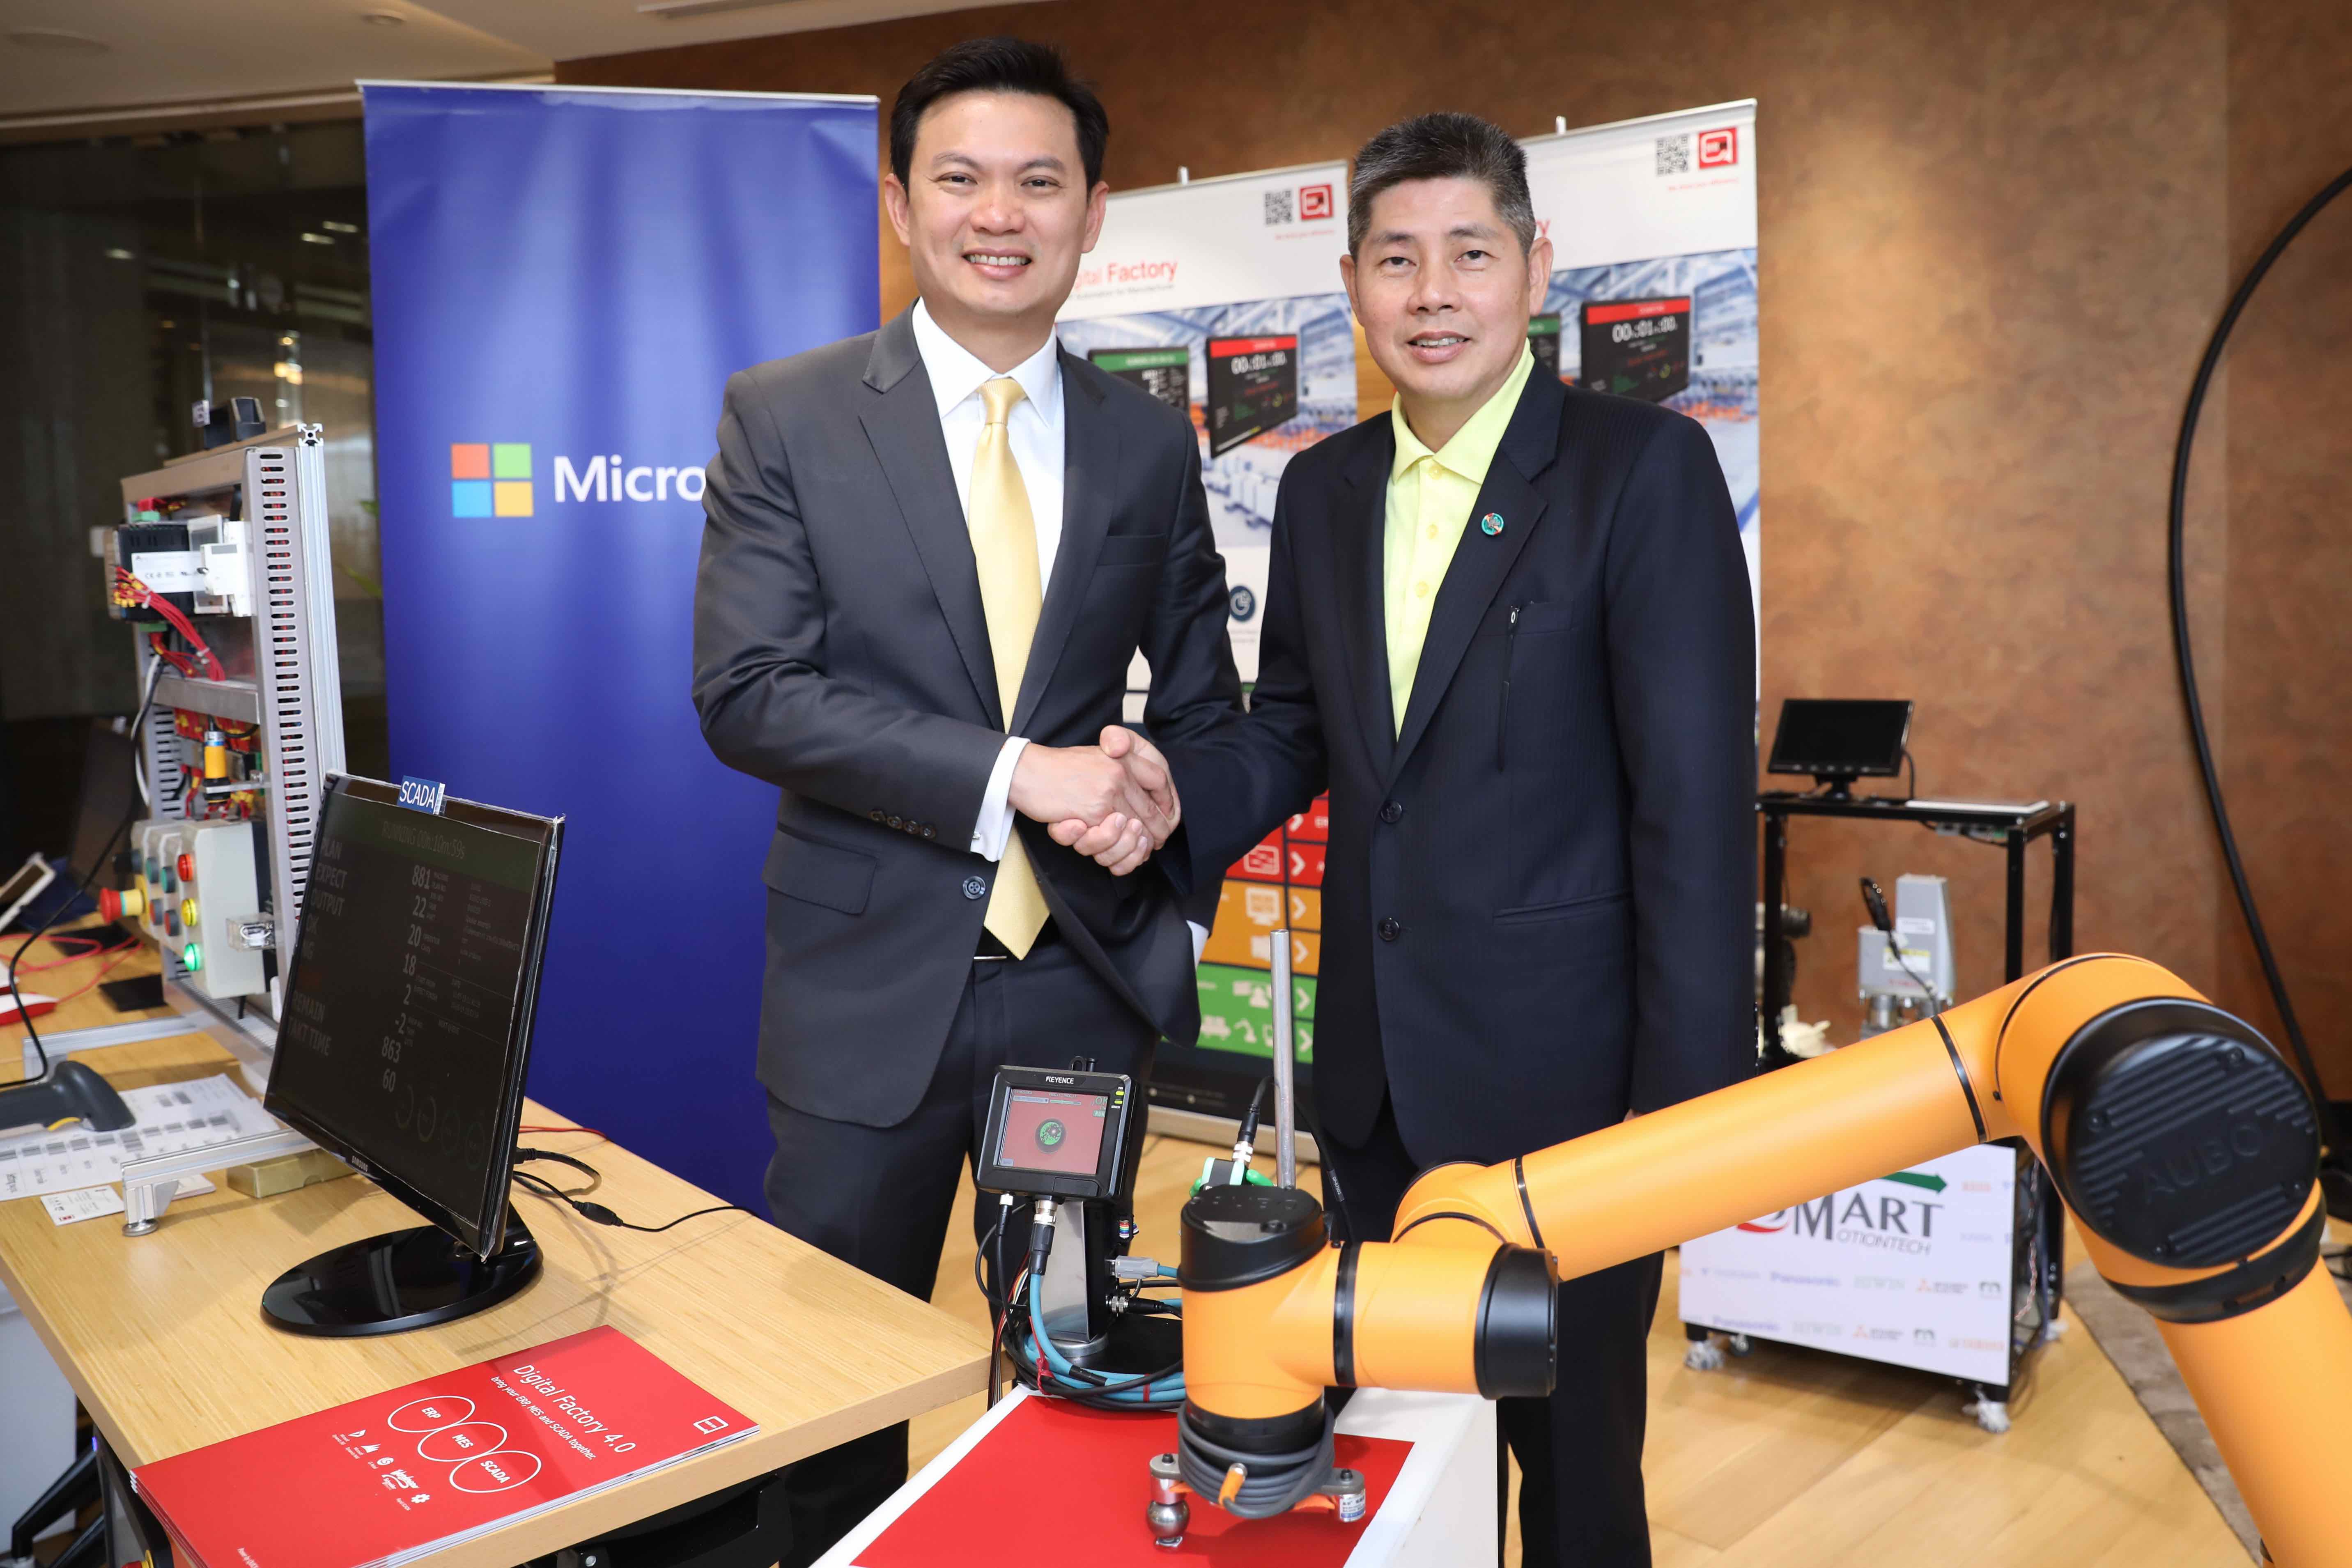 Two men standing behind robot arm and in front of Microsoft banner